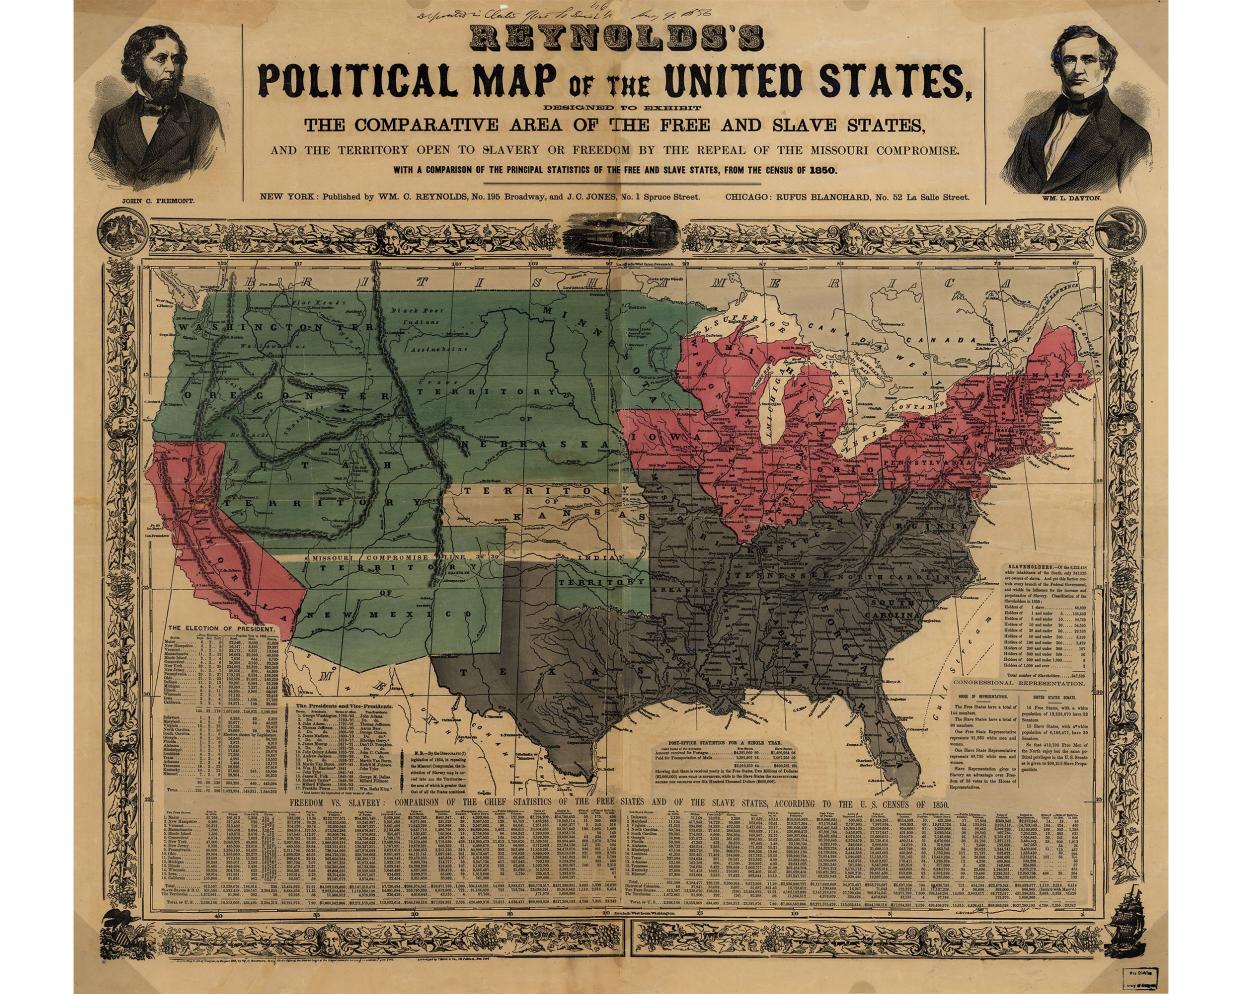 US map 1856 shows free and slave states and populations